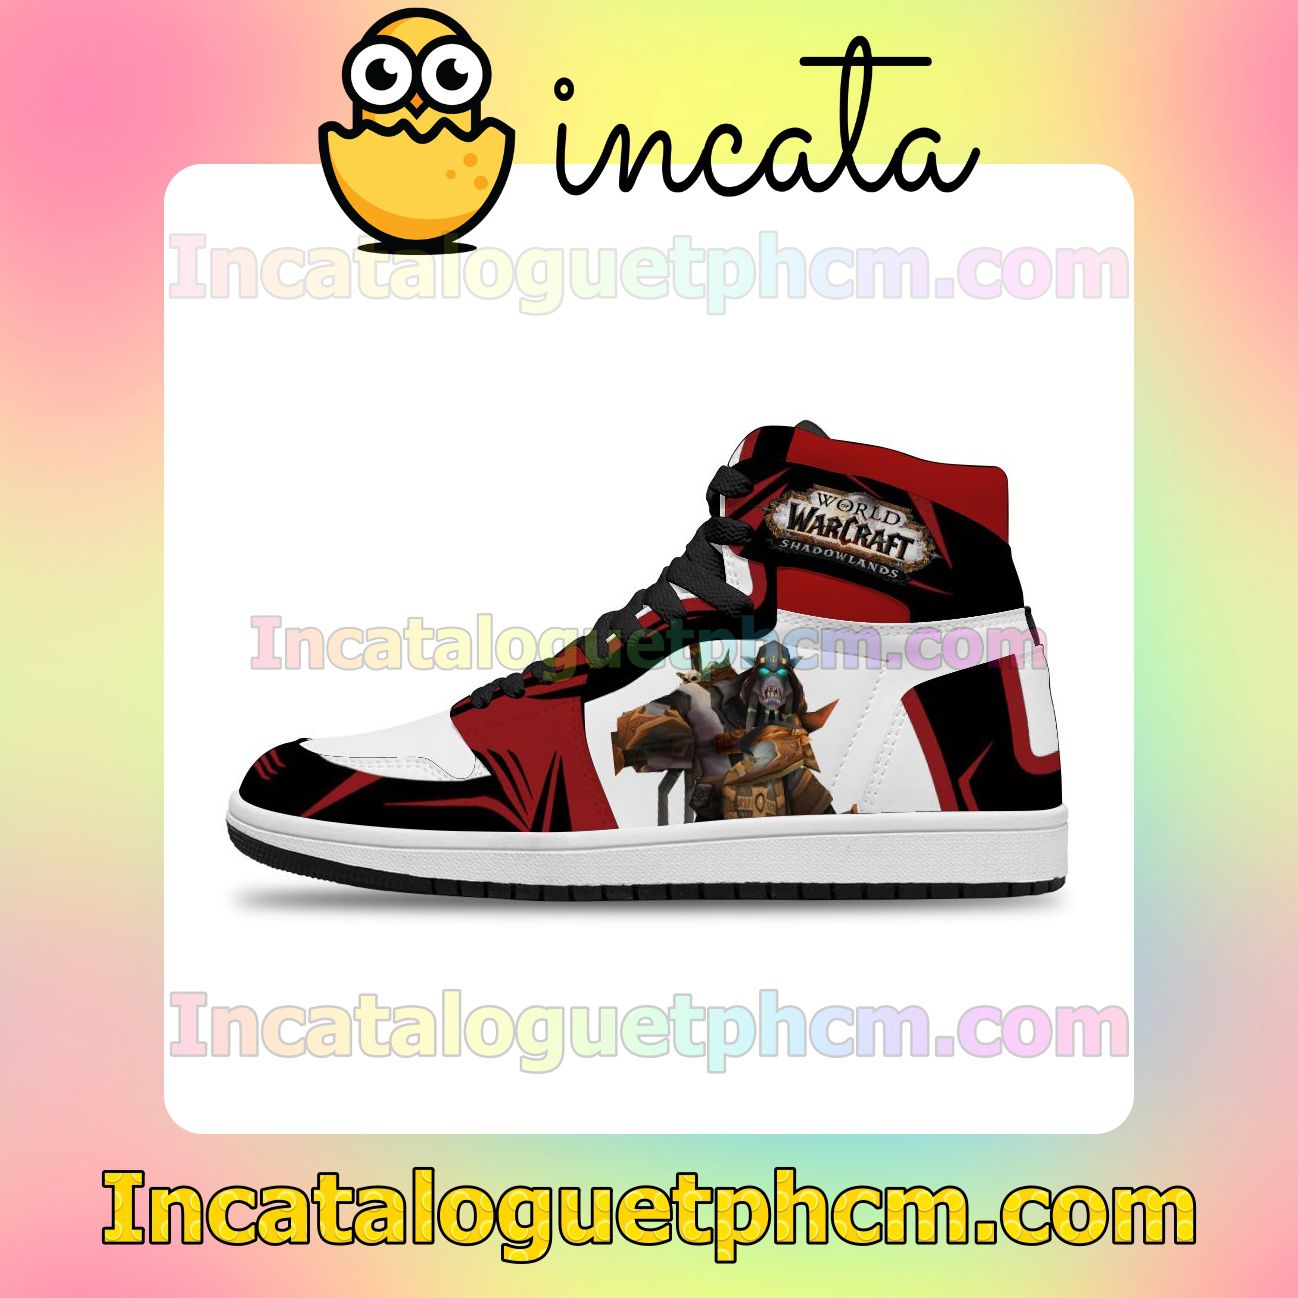 World Of Warcraft VHV.RS Warcraft - Wow World Of Air Jordan 1 Inspired Shoes